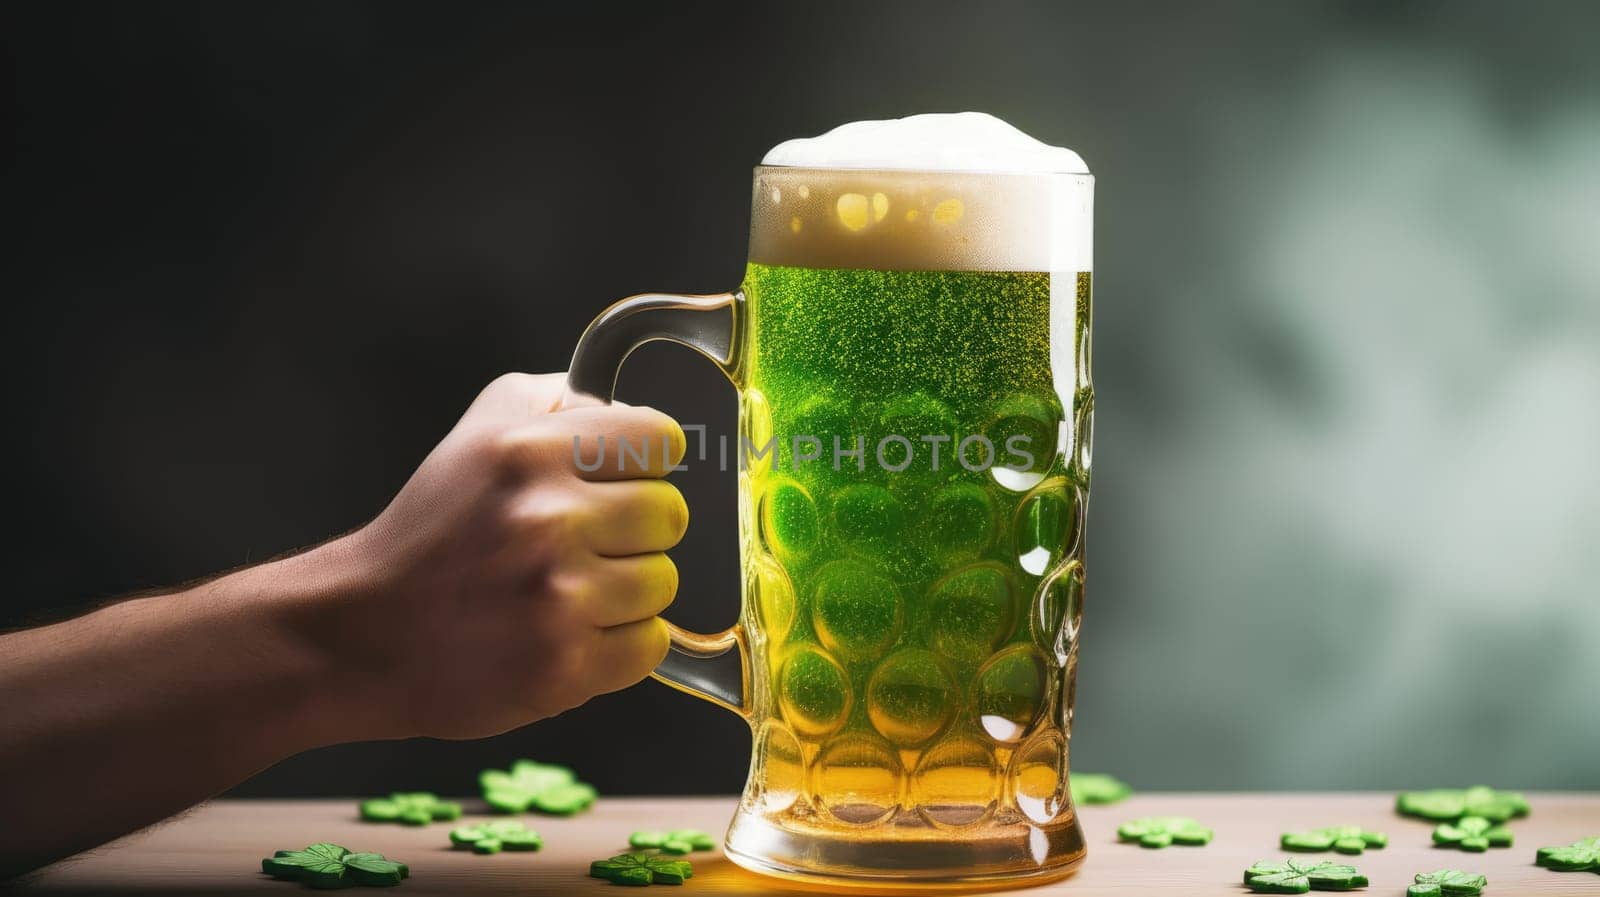 Hand holding a glass of green beer with green four-leaf clover on St. Patricks Day by JuliaDorian